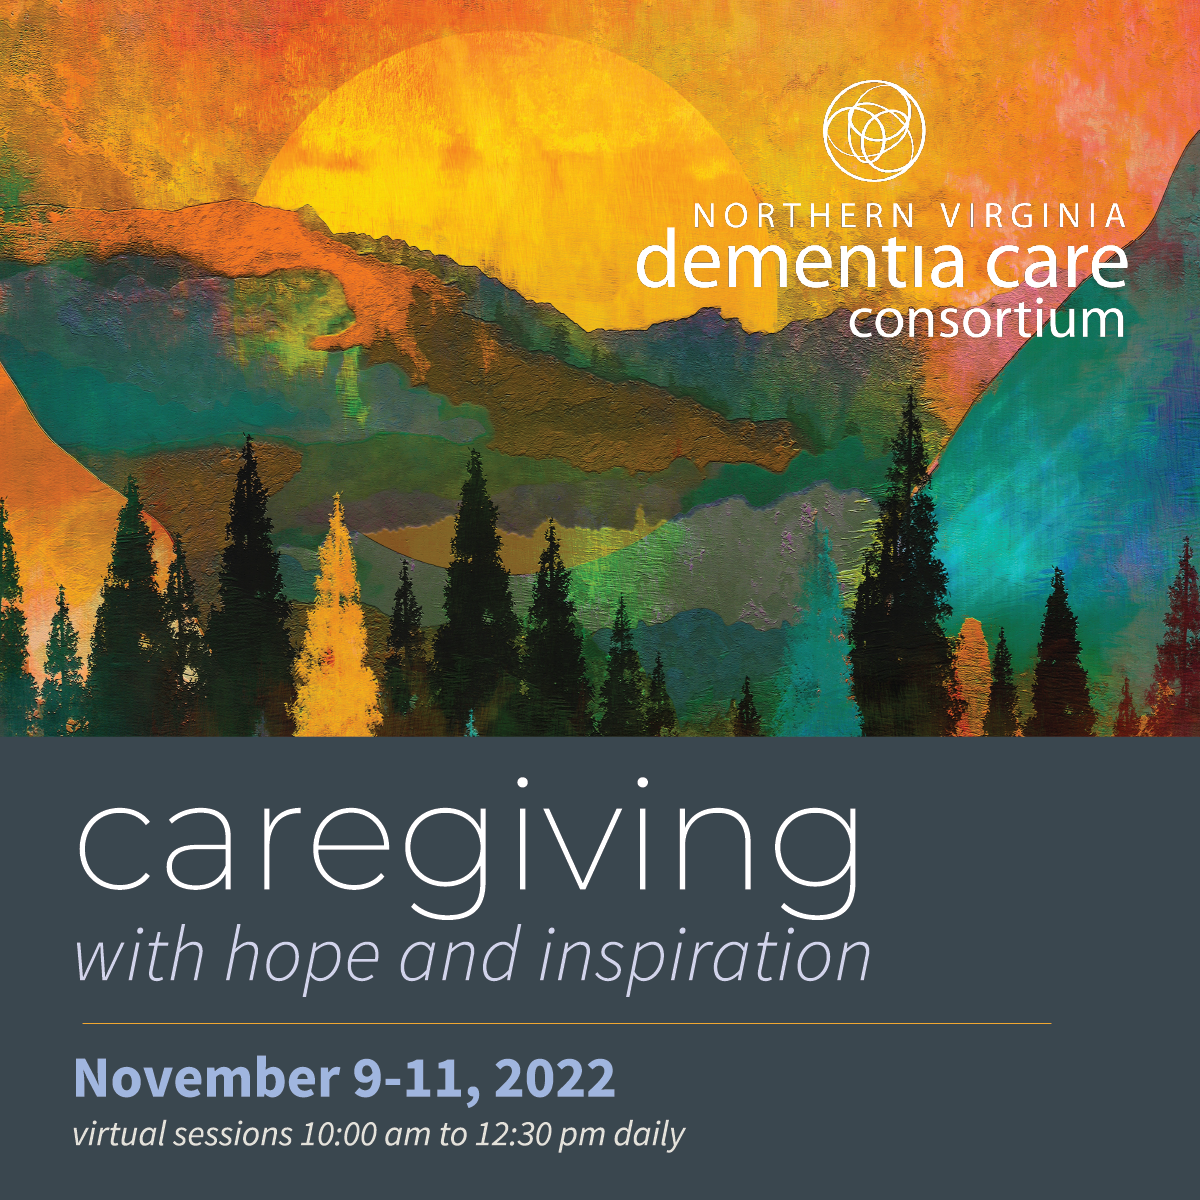 36th Annual Caregivers Conference